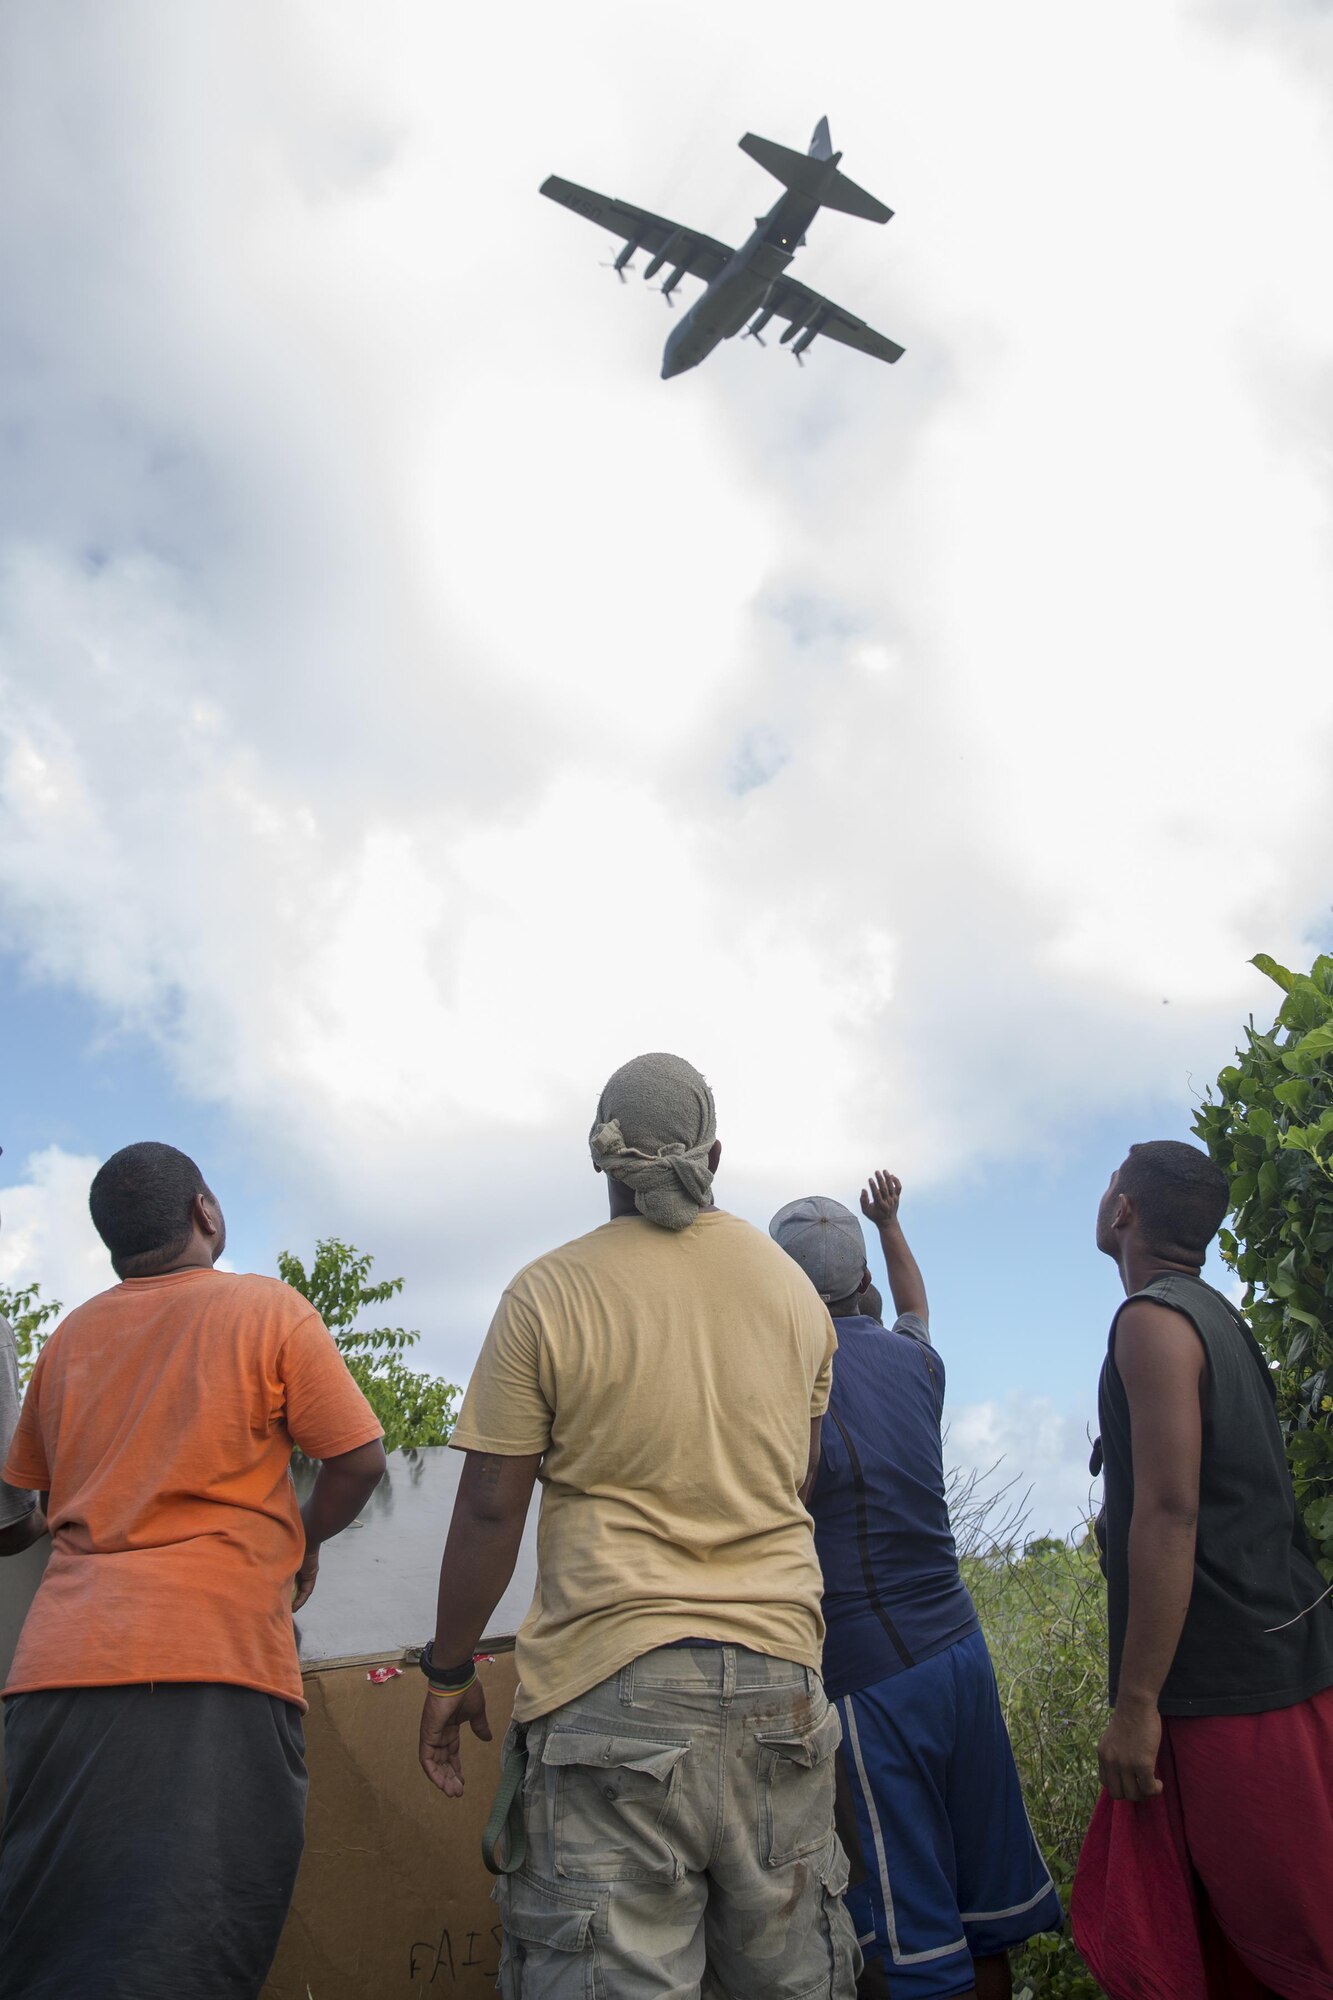 Islanders on Fais island, Federated States of Micronesia, wave to the aircrew of a C-130 Hercules assigned to the 36th Airlift Squadron after dropping a bundle of donated goods and supplies during Operation Christmas Drop 2015, Dec. 8, 2015. Airmen delivered over 800 pounds of supplies to the island of Fais during Operation Christmas Drop 2015. This year marks the first trilateral Operation Christmas Drop where the U.S. Air Force, Japan Air Self-Defense Force and the Royal Australian Air Force work together to provide critical supplies to 56 Micronesian islands impacting 20,000 islanders. (U.S. Air Force photo by Osakabe Yasuo/Released)